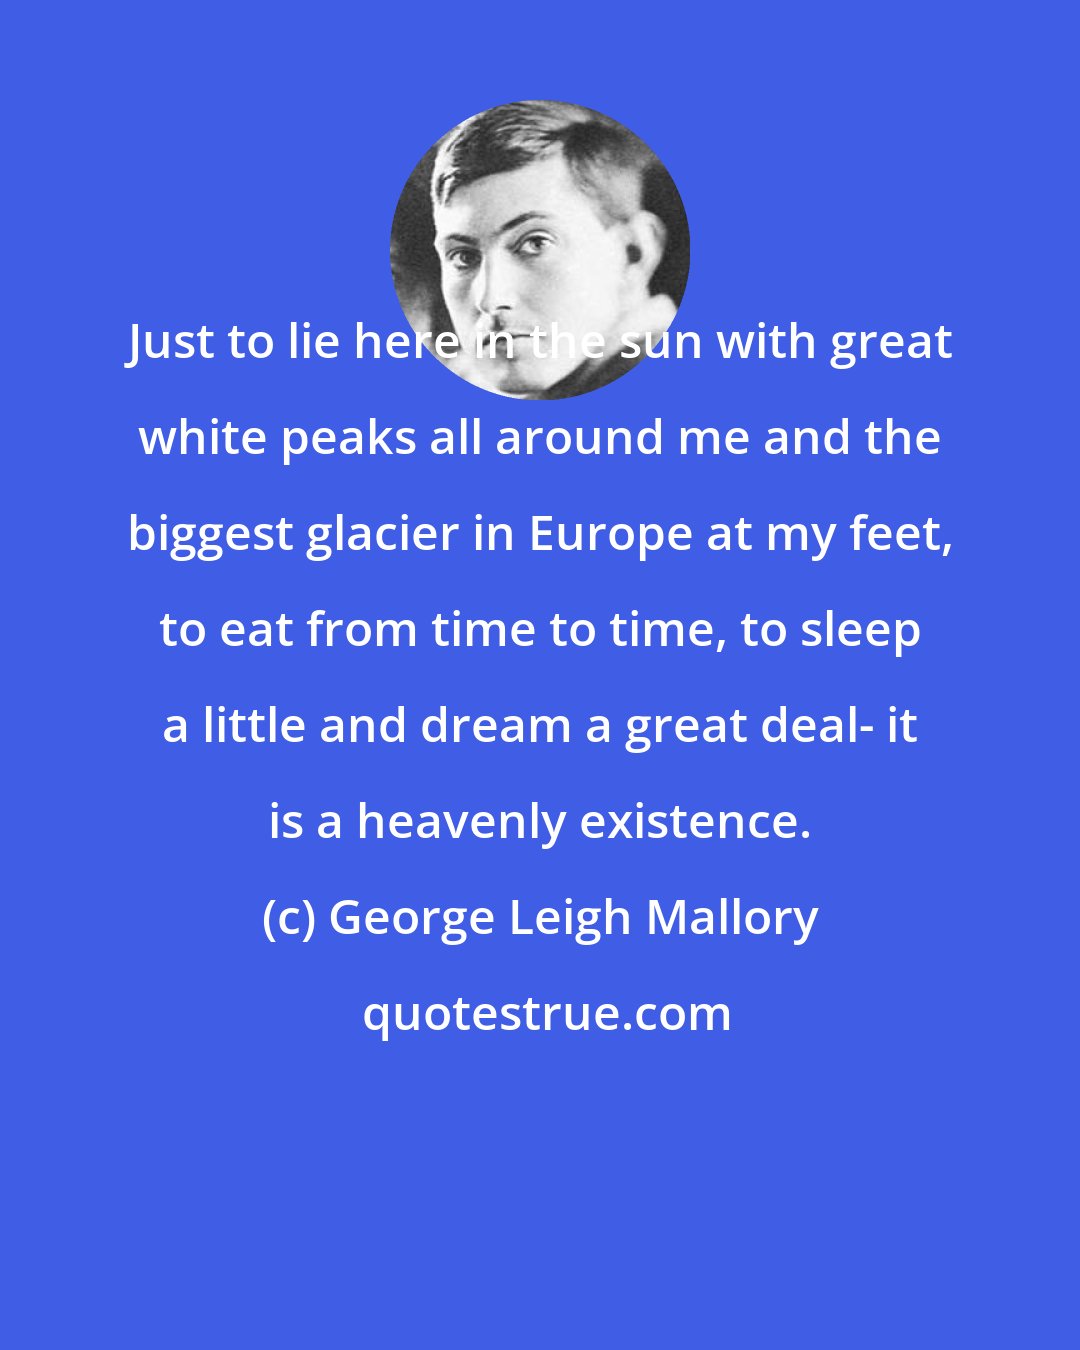 George Leigh Mallory: Just to lie here in the sun with great white peaks all around me and the biggest glacier in Europe at my feet, to eat from time to time, to sleep a little and dream a great deal- it is a heavenly existence.